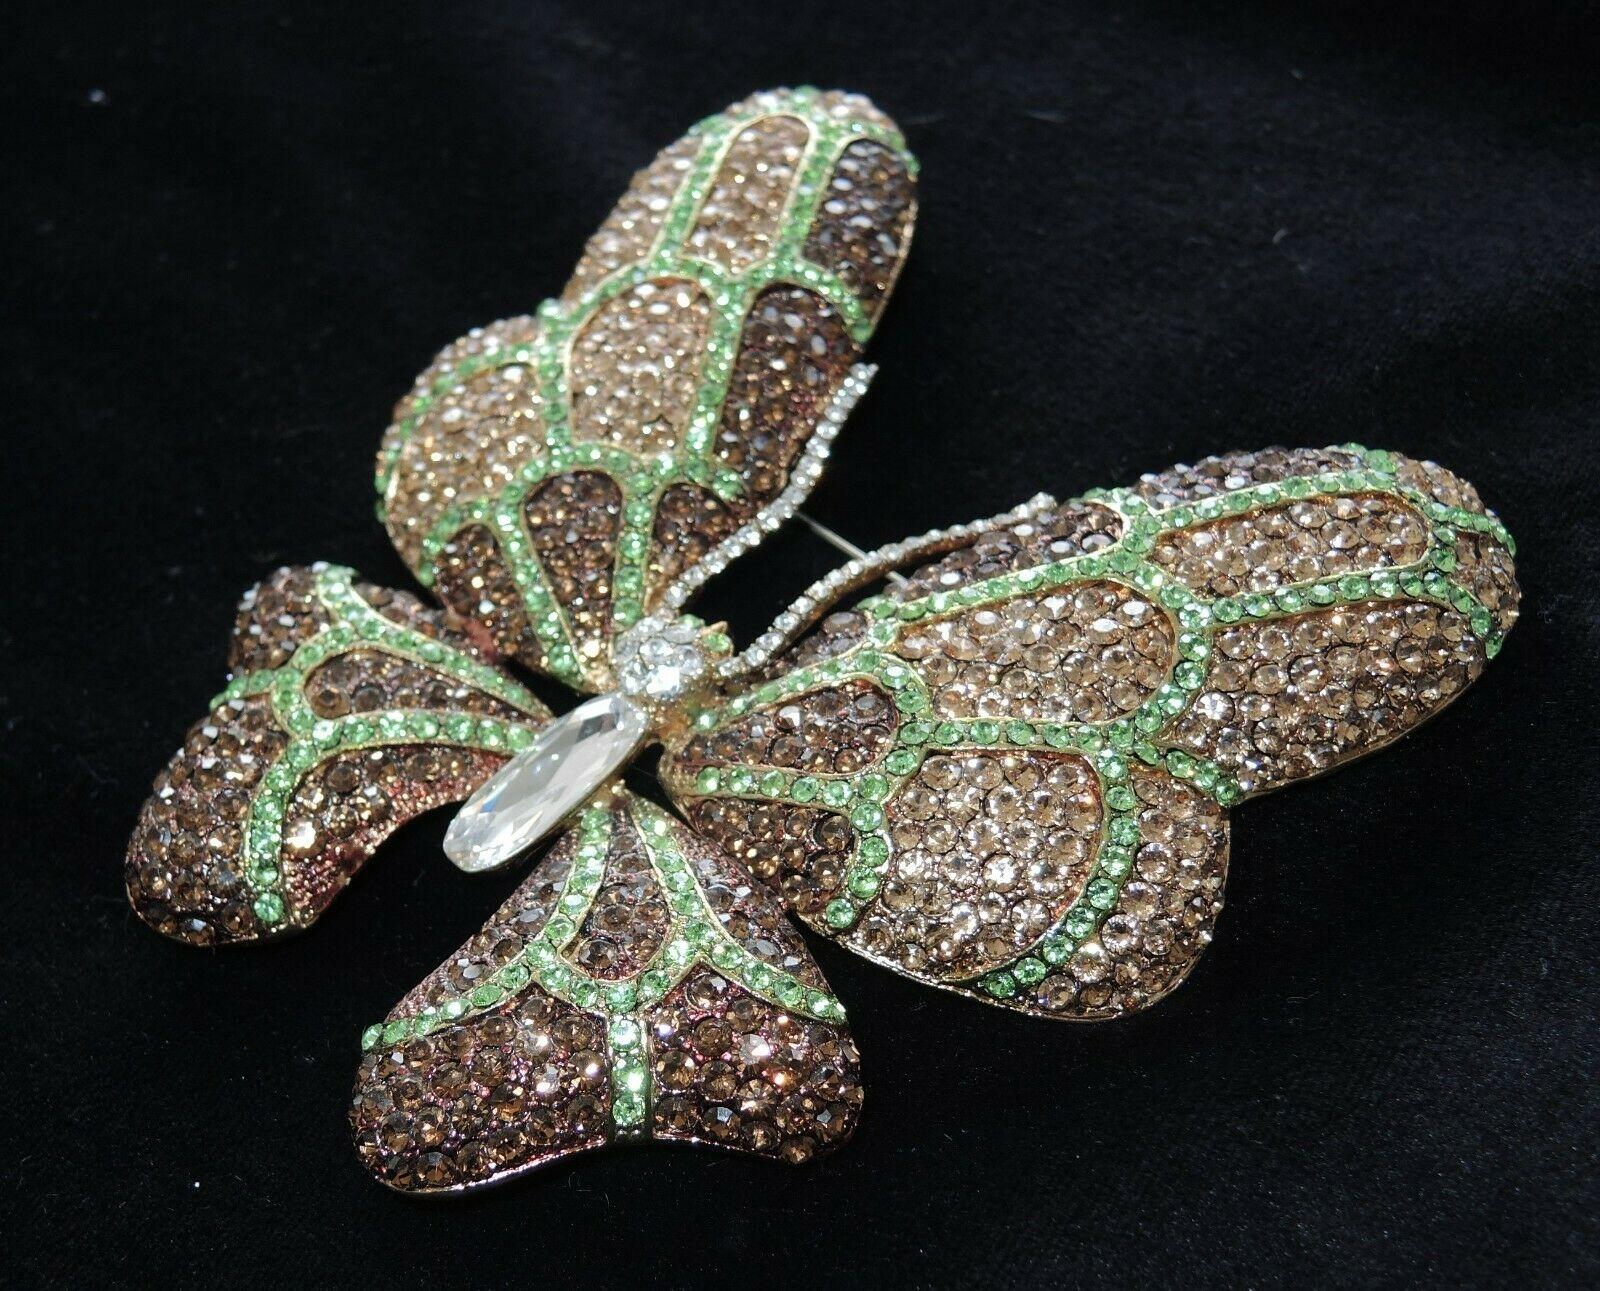 Sensational CARLO ZINI Designer Butterfly Crystal Brooch Pin. Encrusted and Hand set with Sparkling Crystals in brown, champagne, light green and clear. Measuring approx. 3.75” w x 4.50” h. Signed: ZINI. Comes with original pouch and tag. Pristine,